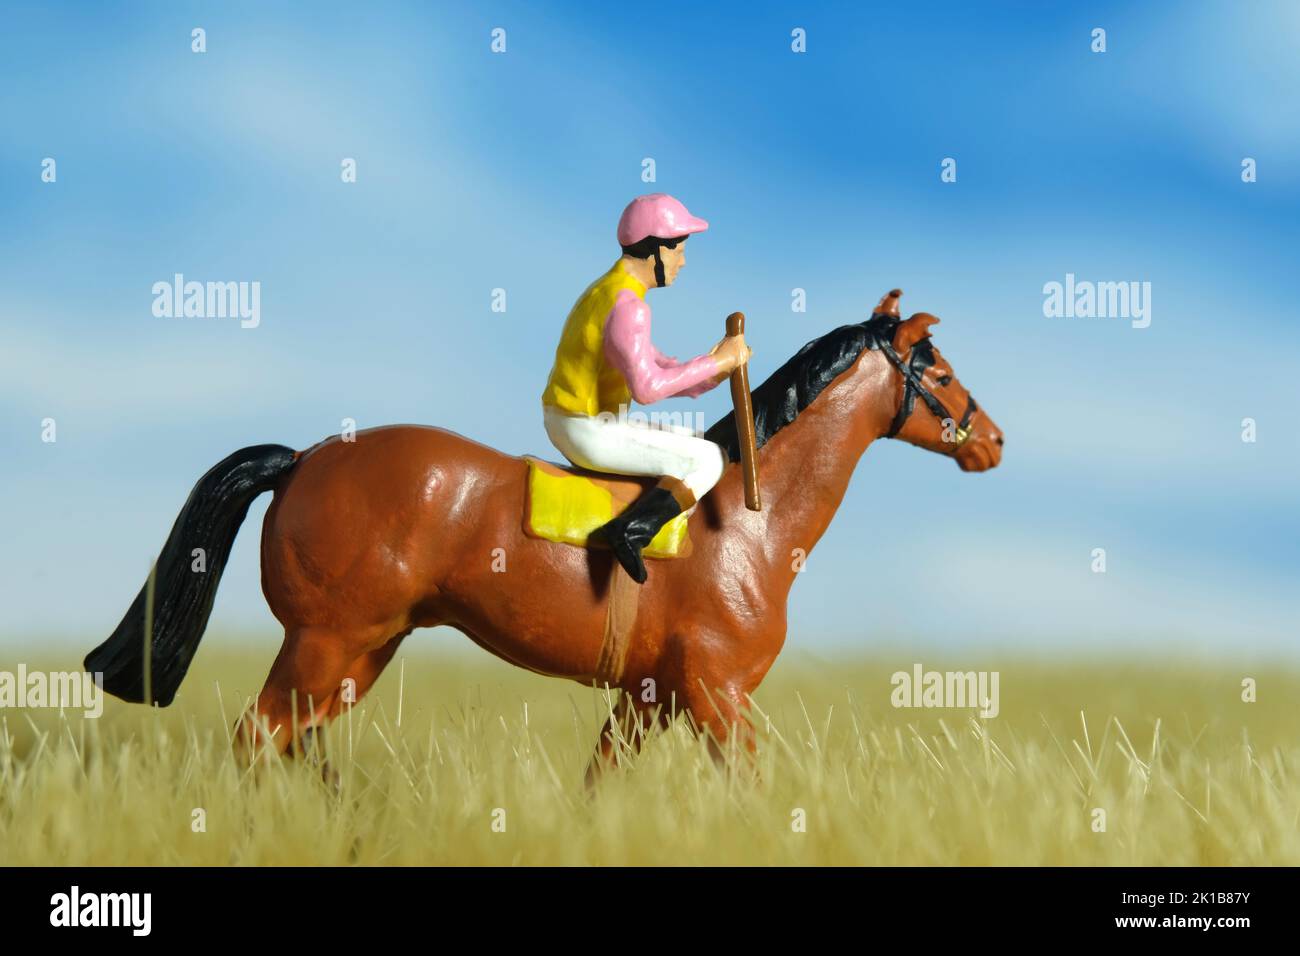 Miniature people toy figure photography. A jockey man riding horse at dried meadow field for training. Image photo Stock Photo